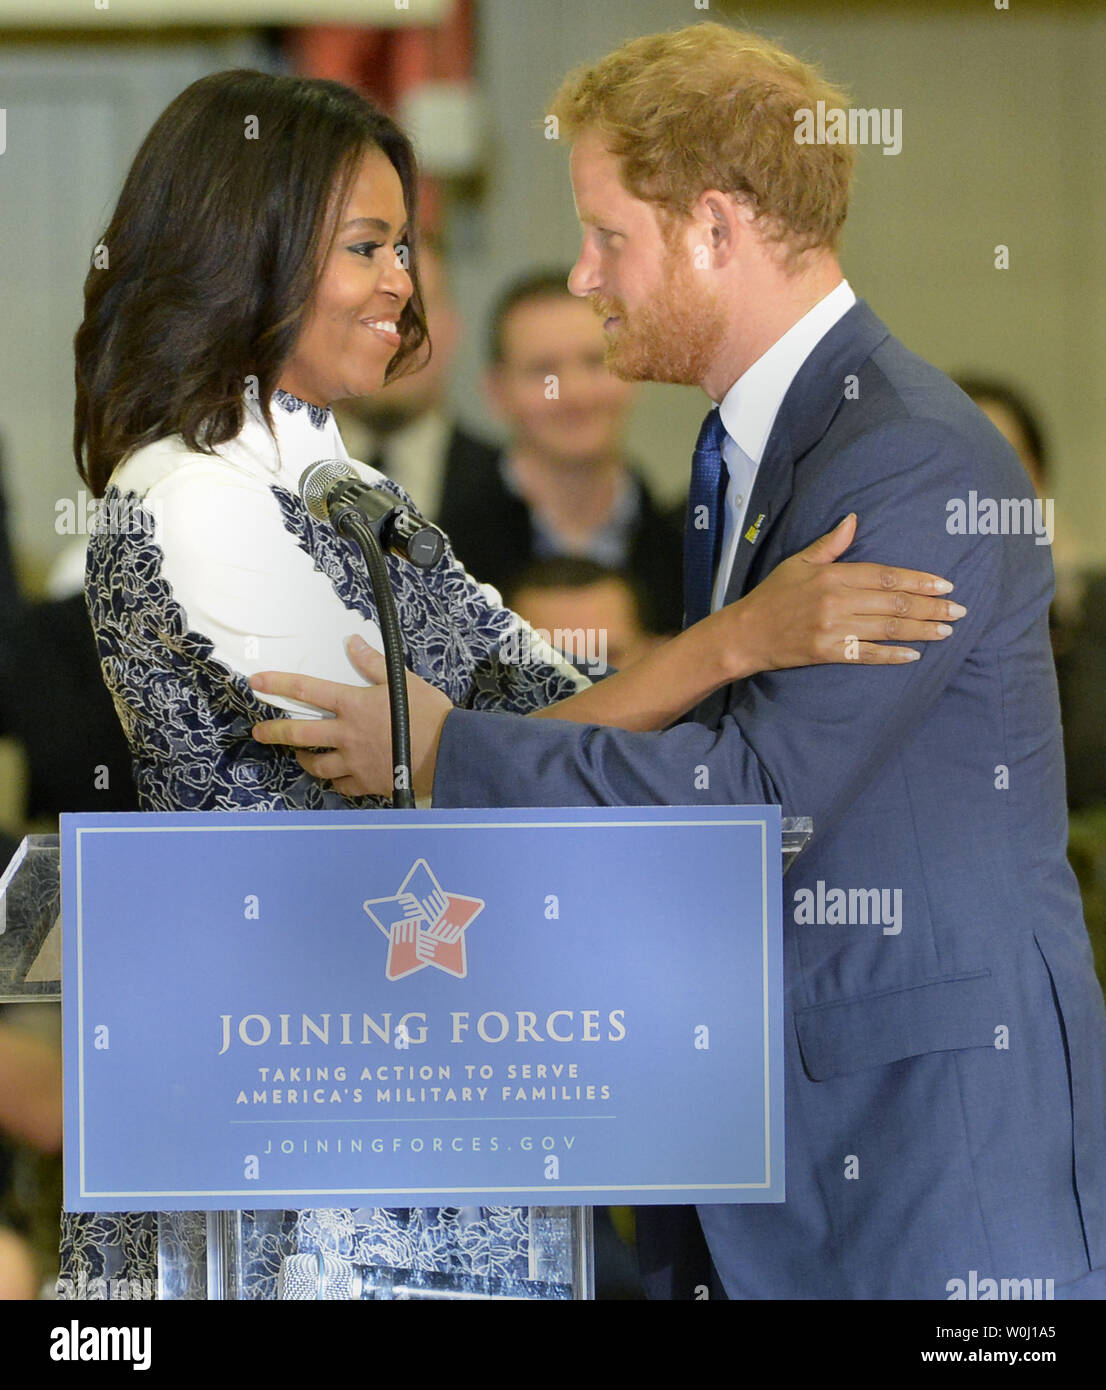 HRH Prince Harry (R) and First Lady Michelle Obama embrace prior to a basketball game by wounded service members, October 28, 2015, at Ft. Belvoir, Virginia. The event is a celebration of the Joining Forces Initiative and the upcoming 2016 Invictus Games in Orlando, Florida, in which wounded military personnel compete in sporting competition.       Photo by Mike Theiler/UPI Stock Photo